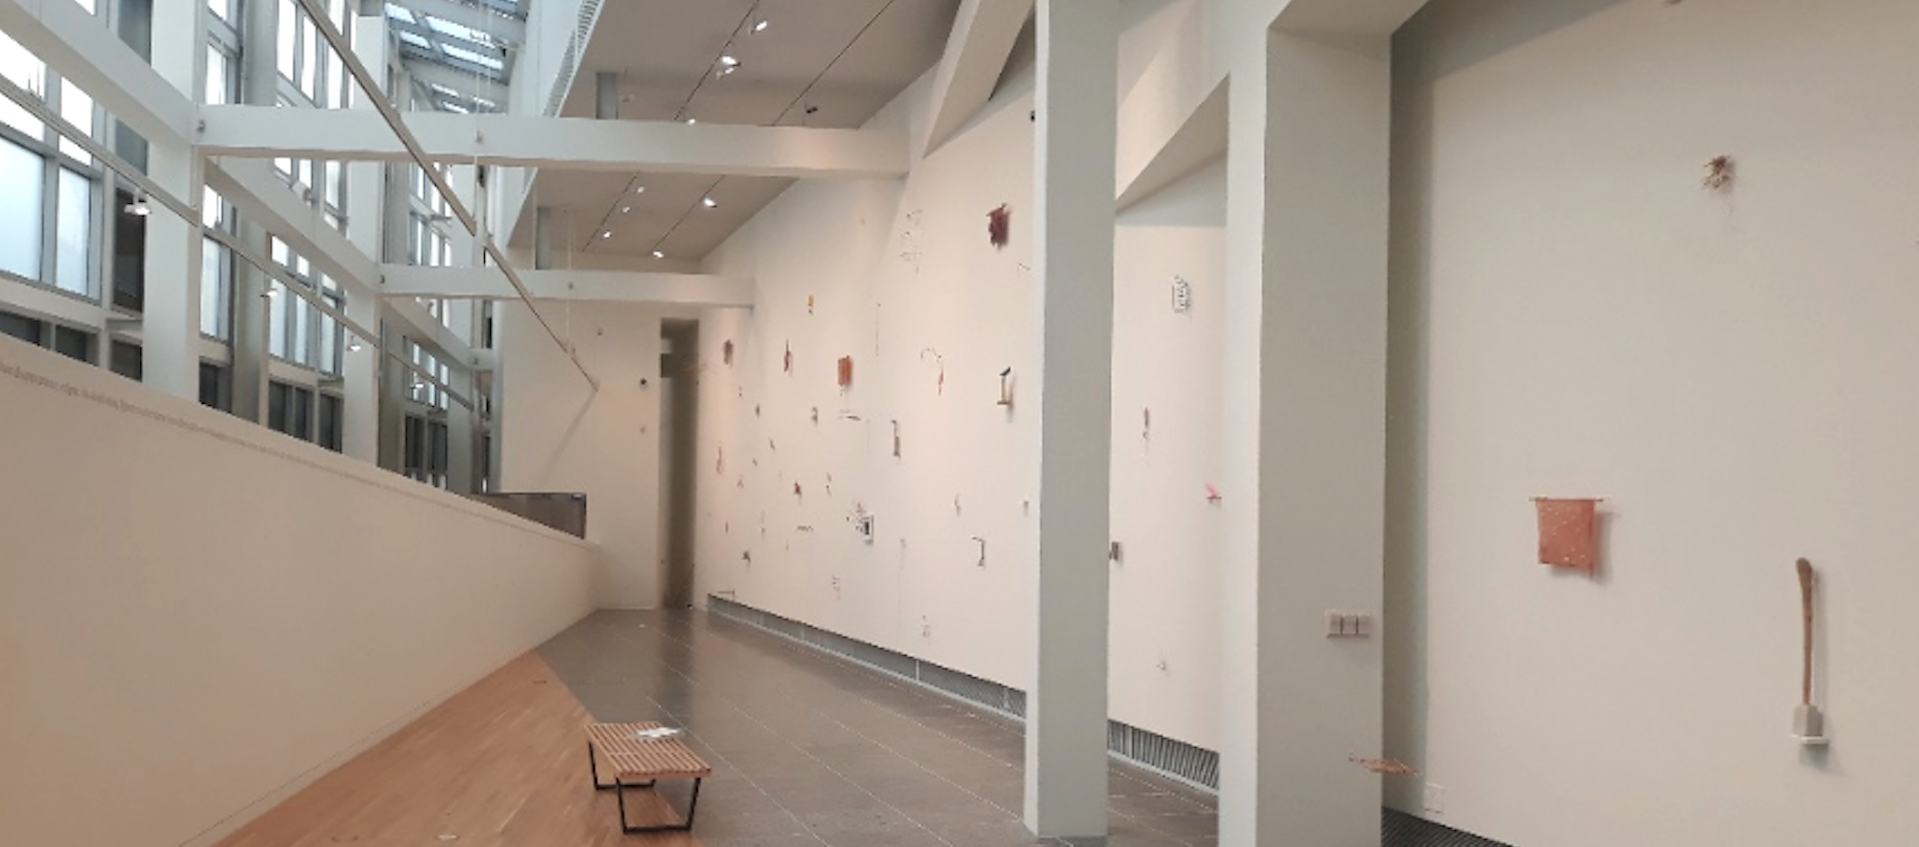 An image shot from above of Gallery B in the Wexner Center for the Arts at The Ohio State University. The image includes the white grid work near the ceiling of the center's galleries and an installation of precarios by artist Cecilia Vicuña.